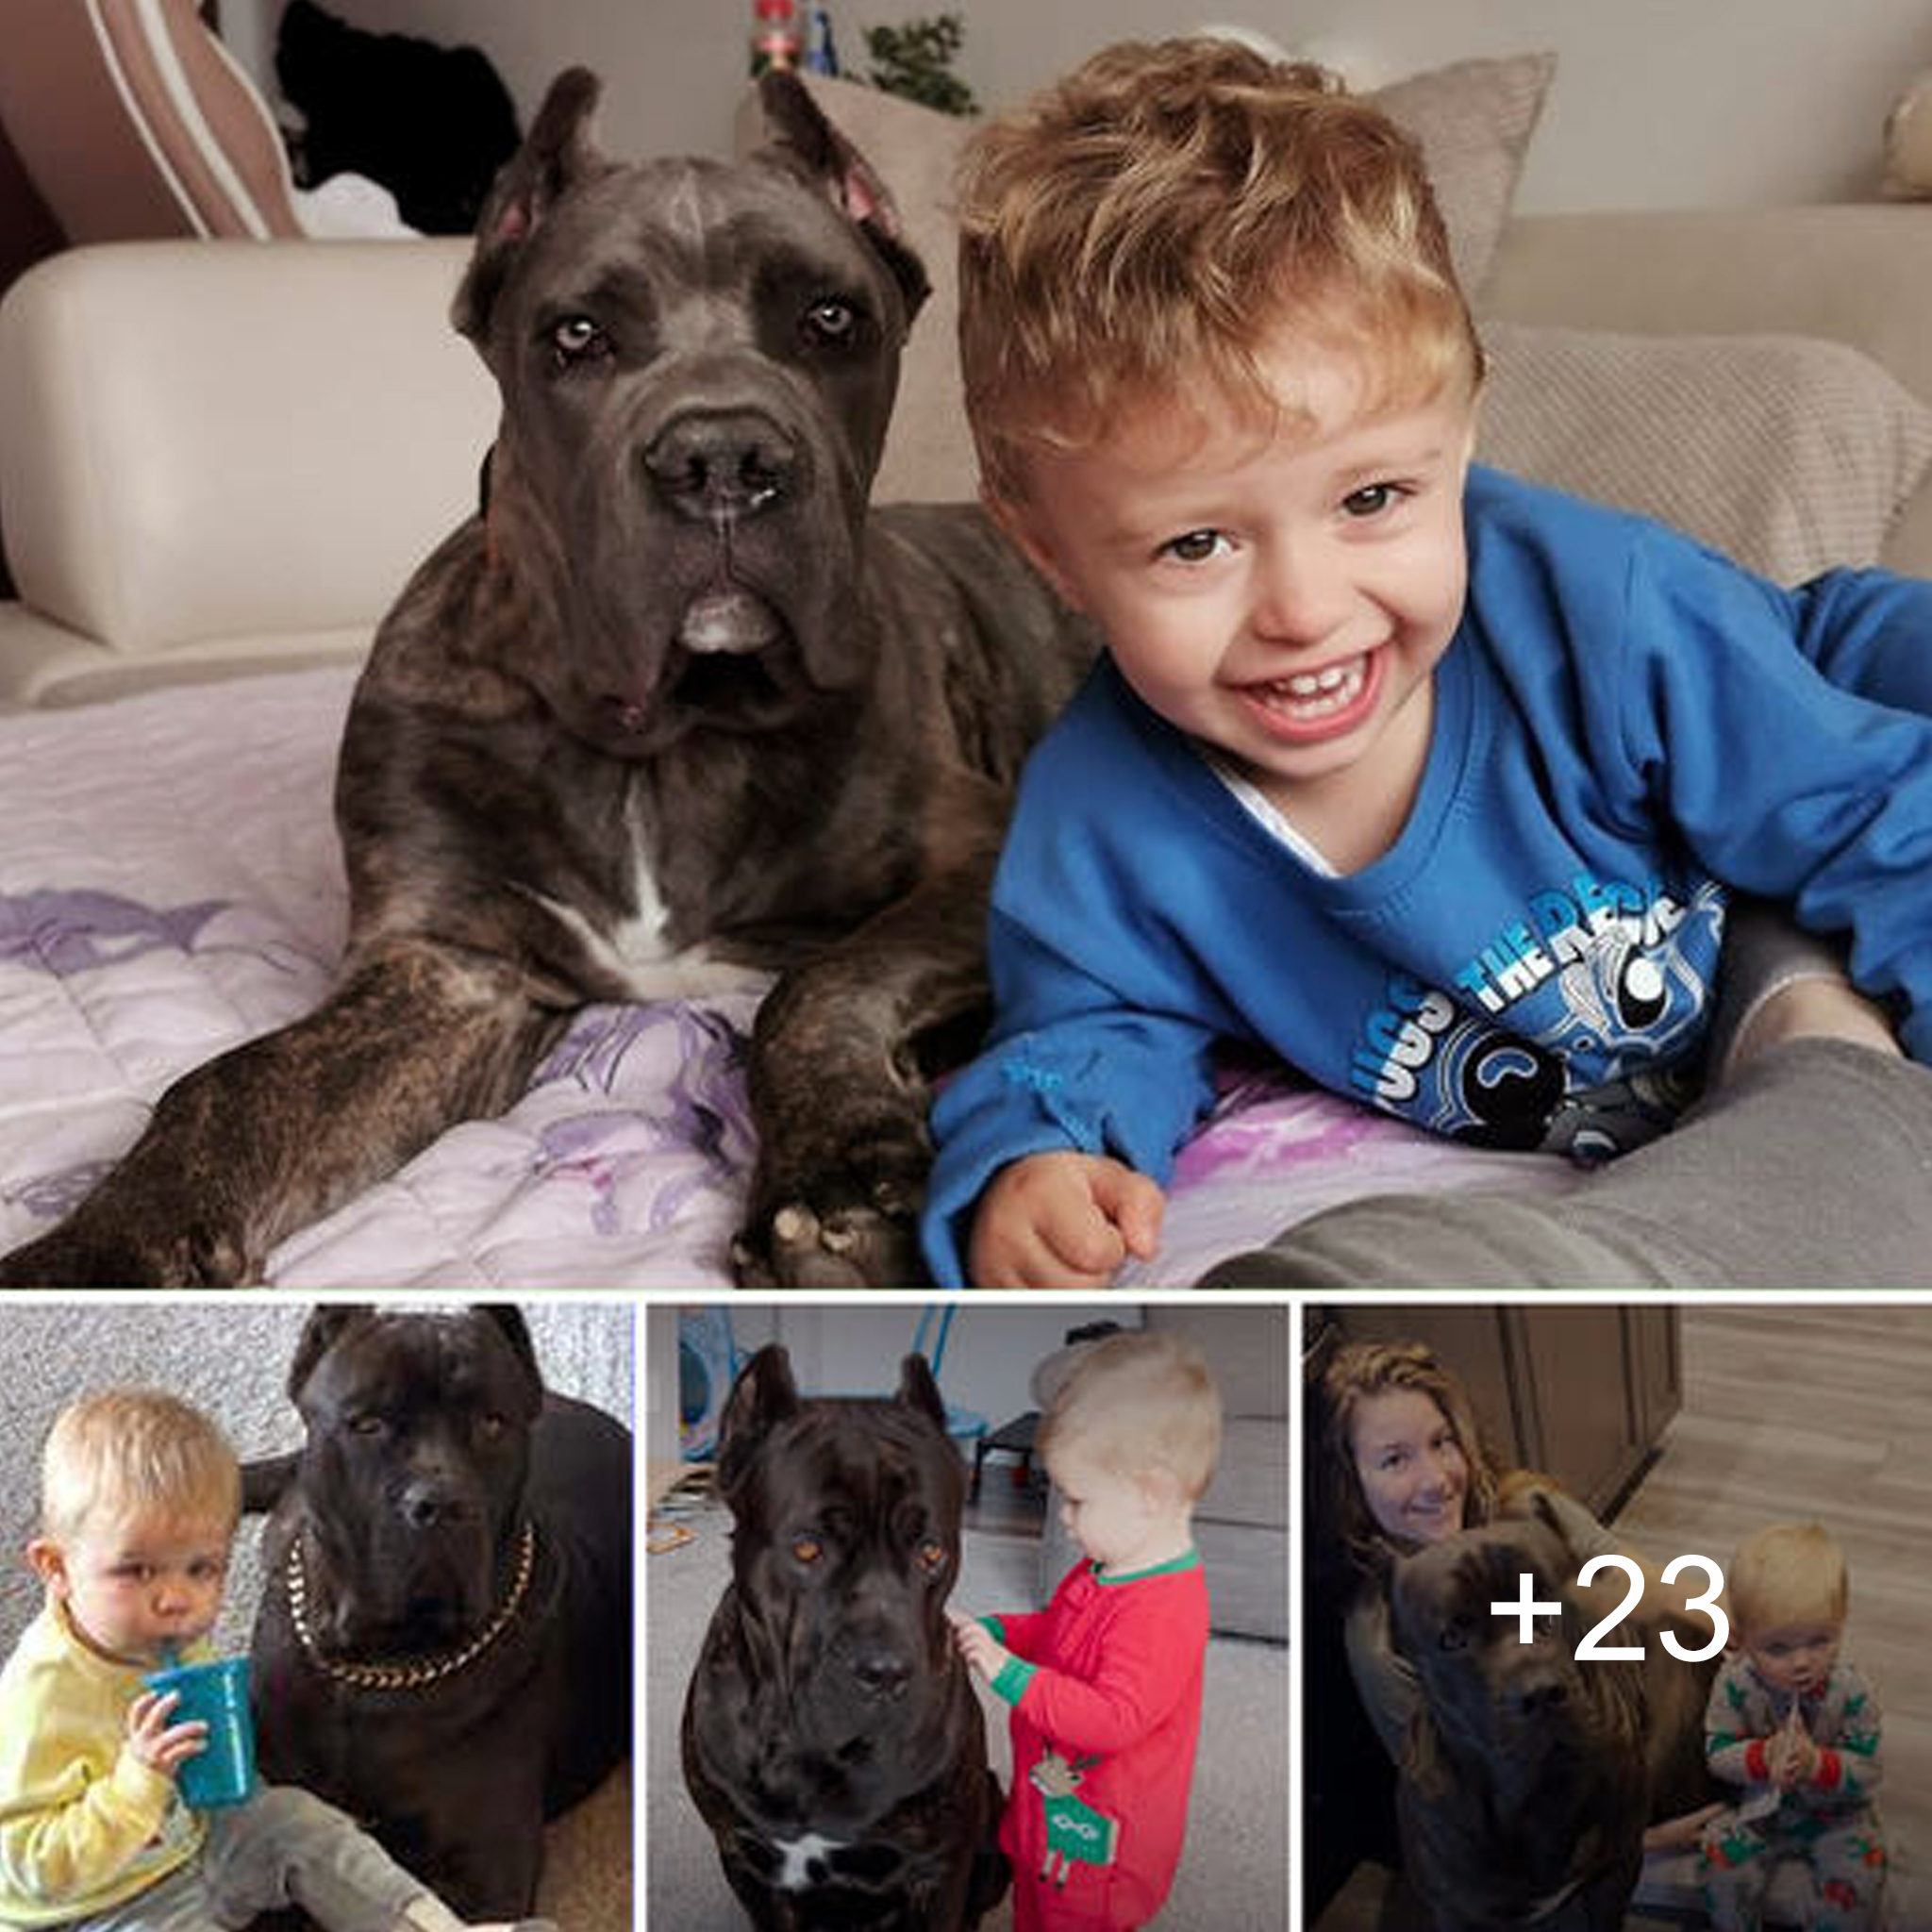 “Growing Up Together: Baby and Loyal 125-Pound Dog Forge an Unbreakable Bond”